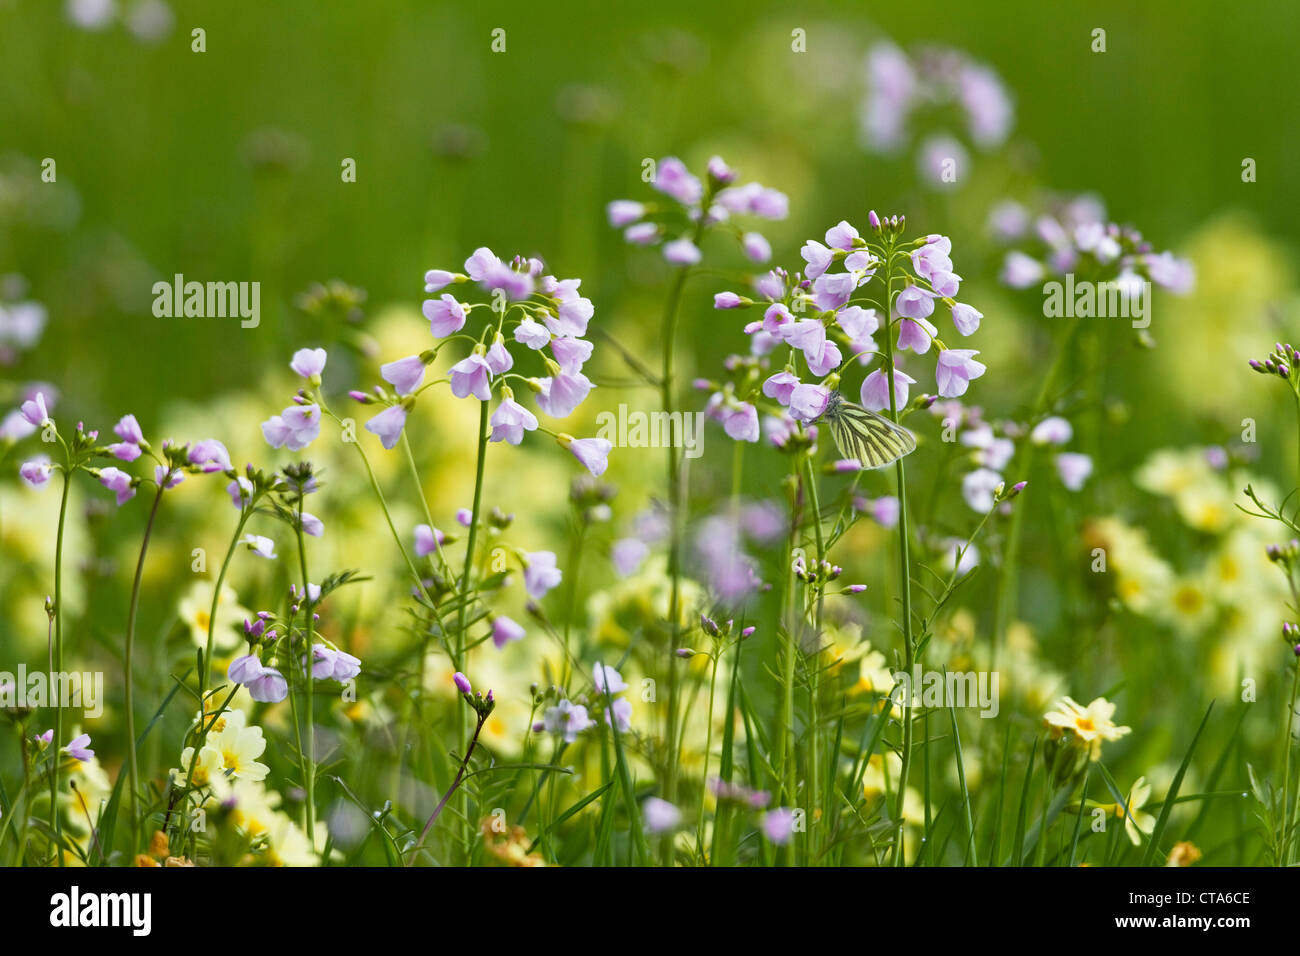 Flower meadow with lady's smock (Cardamine pratensis) and oxlips (Primula elatior), Upper Bavaria, Germany Stock Photo